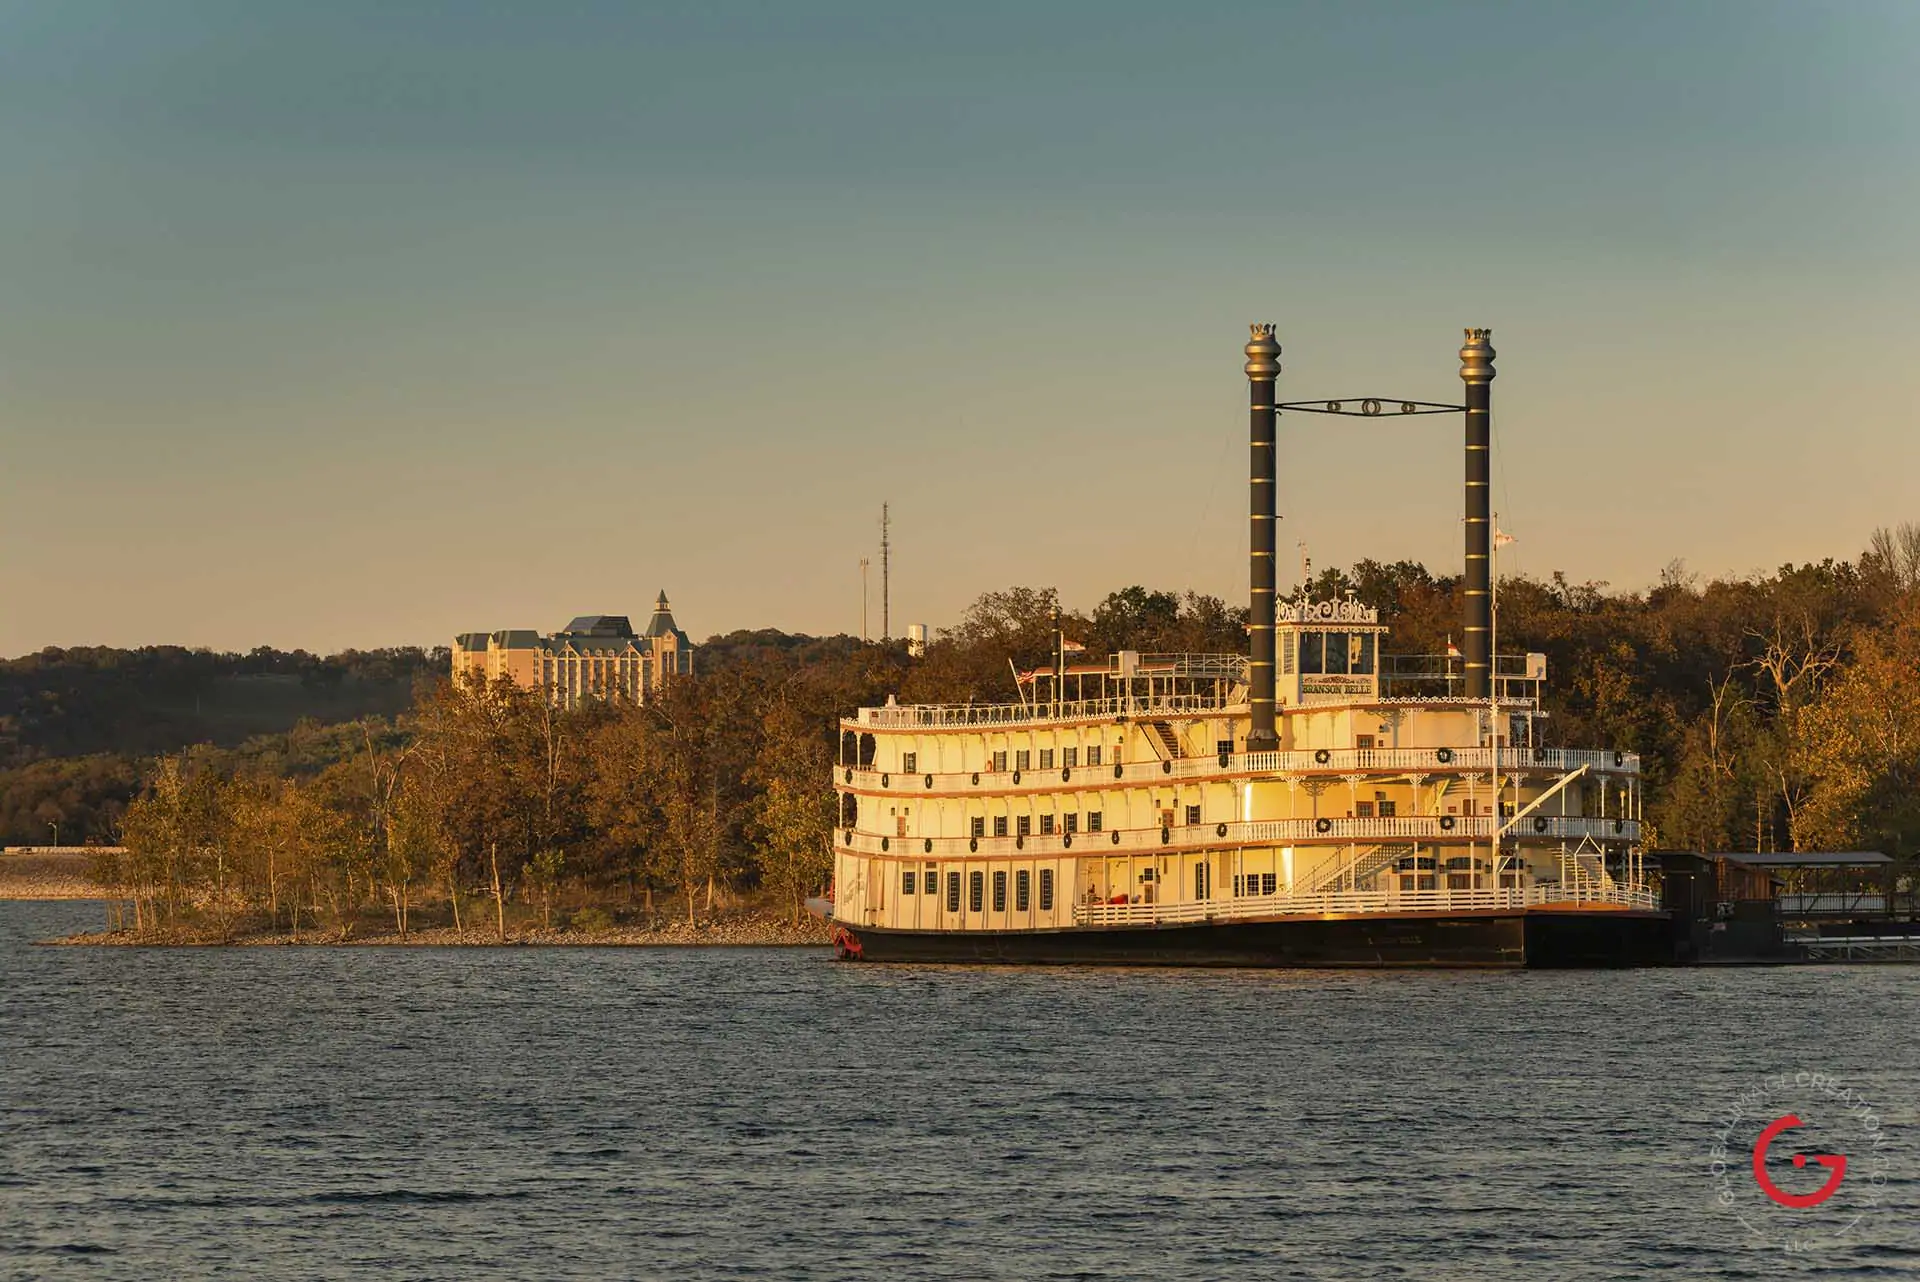 Chateau on the Lake from boat on Table Rock Lake. Showboat Branson Belle in foreground. - Advertising photographers in Branson Missouri, Branson Missouri photography